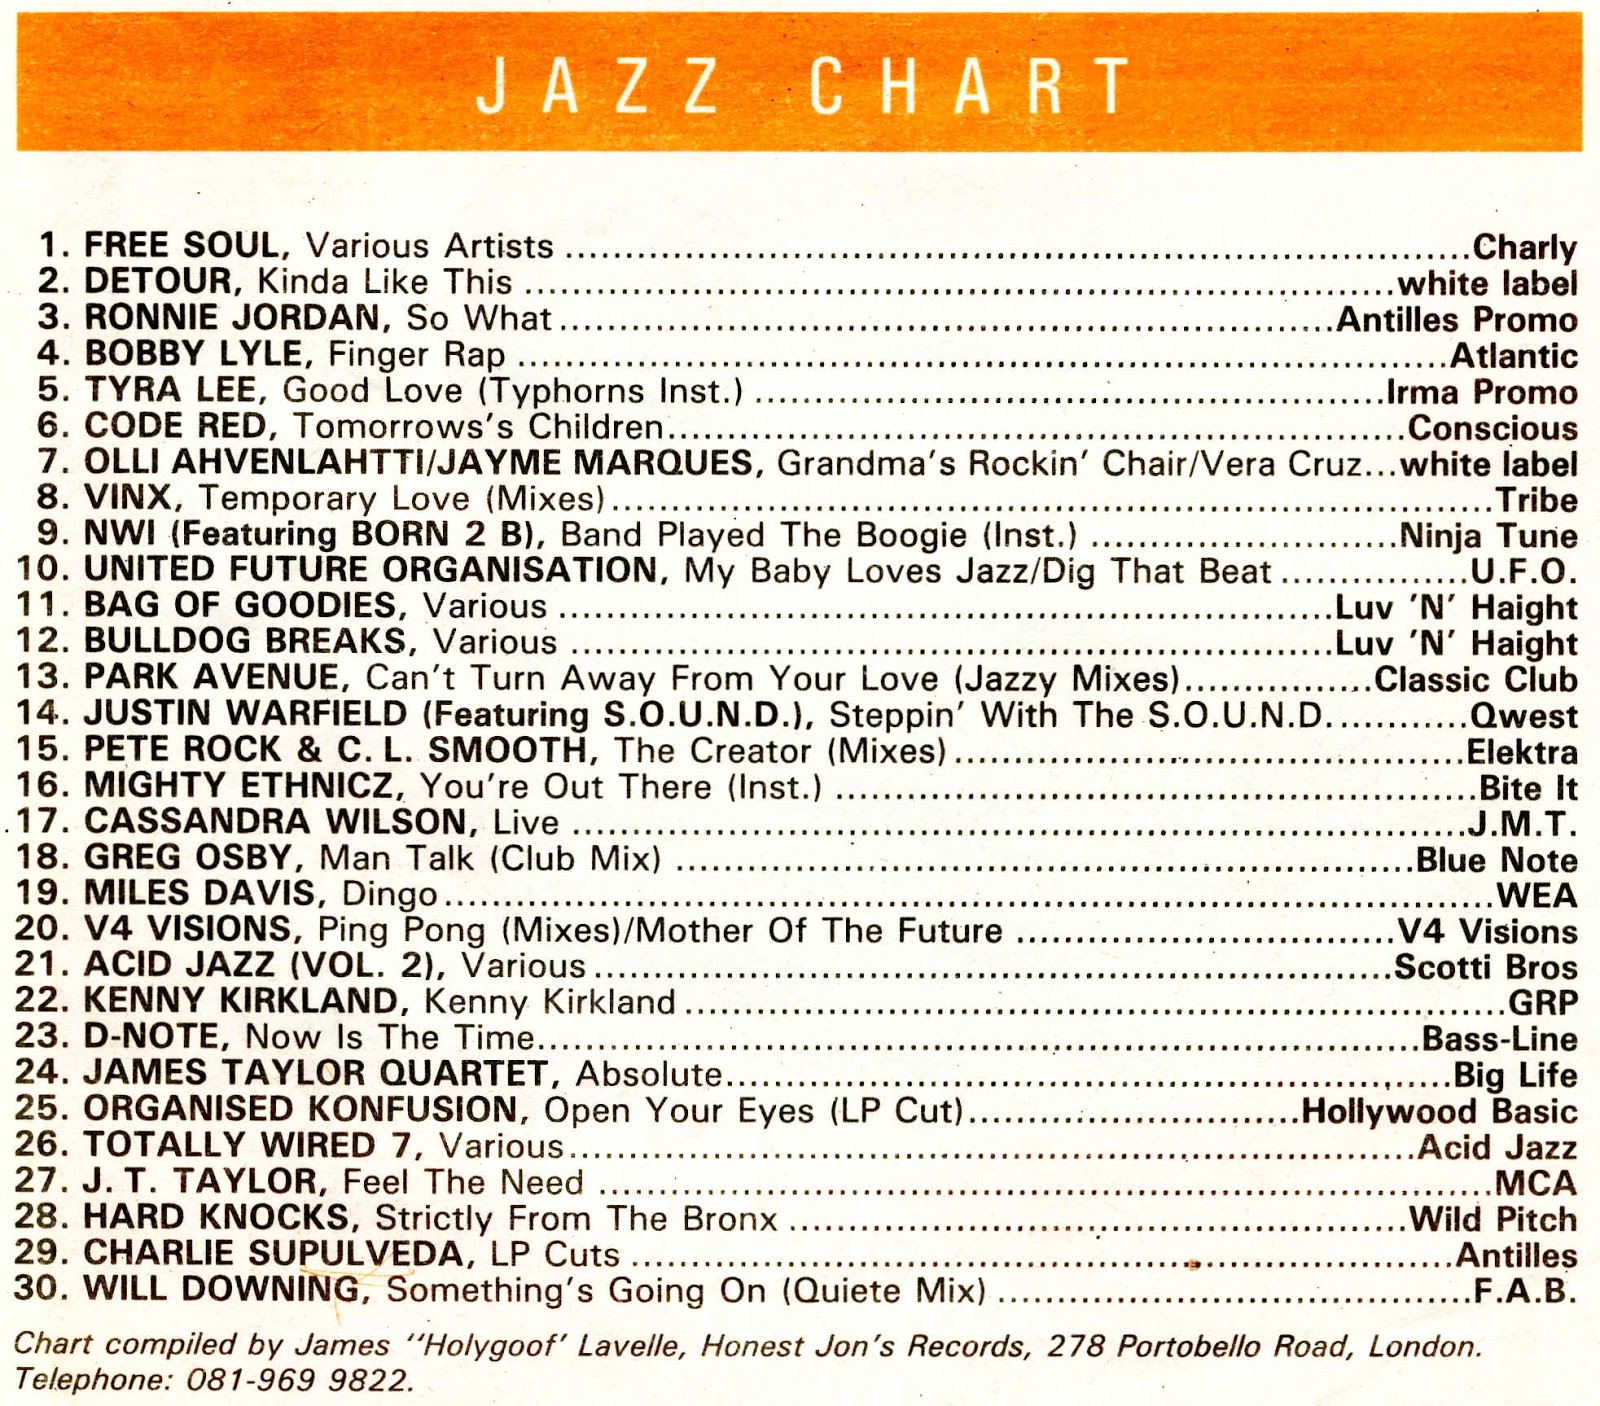 Chart from Echoes December 1991